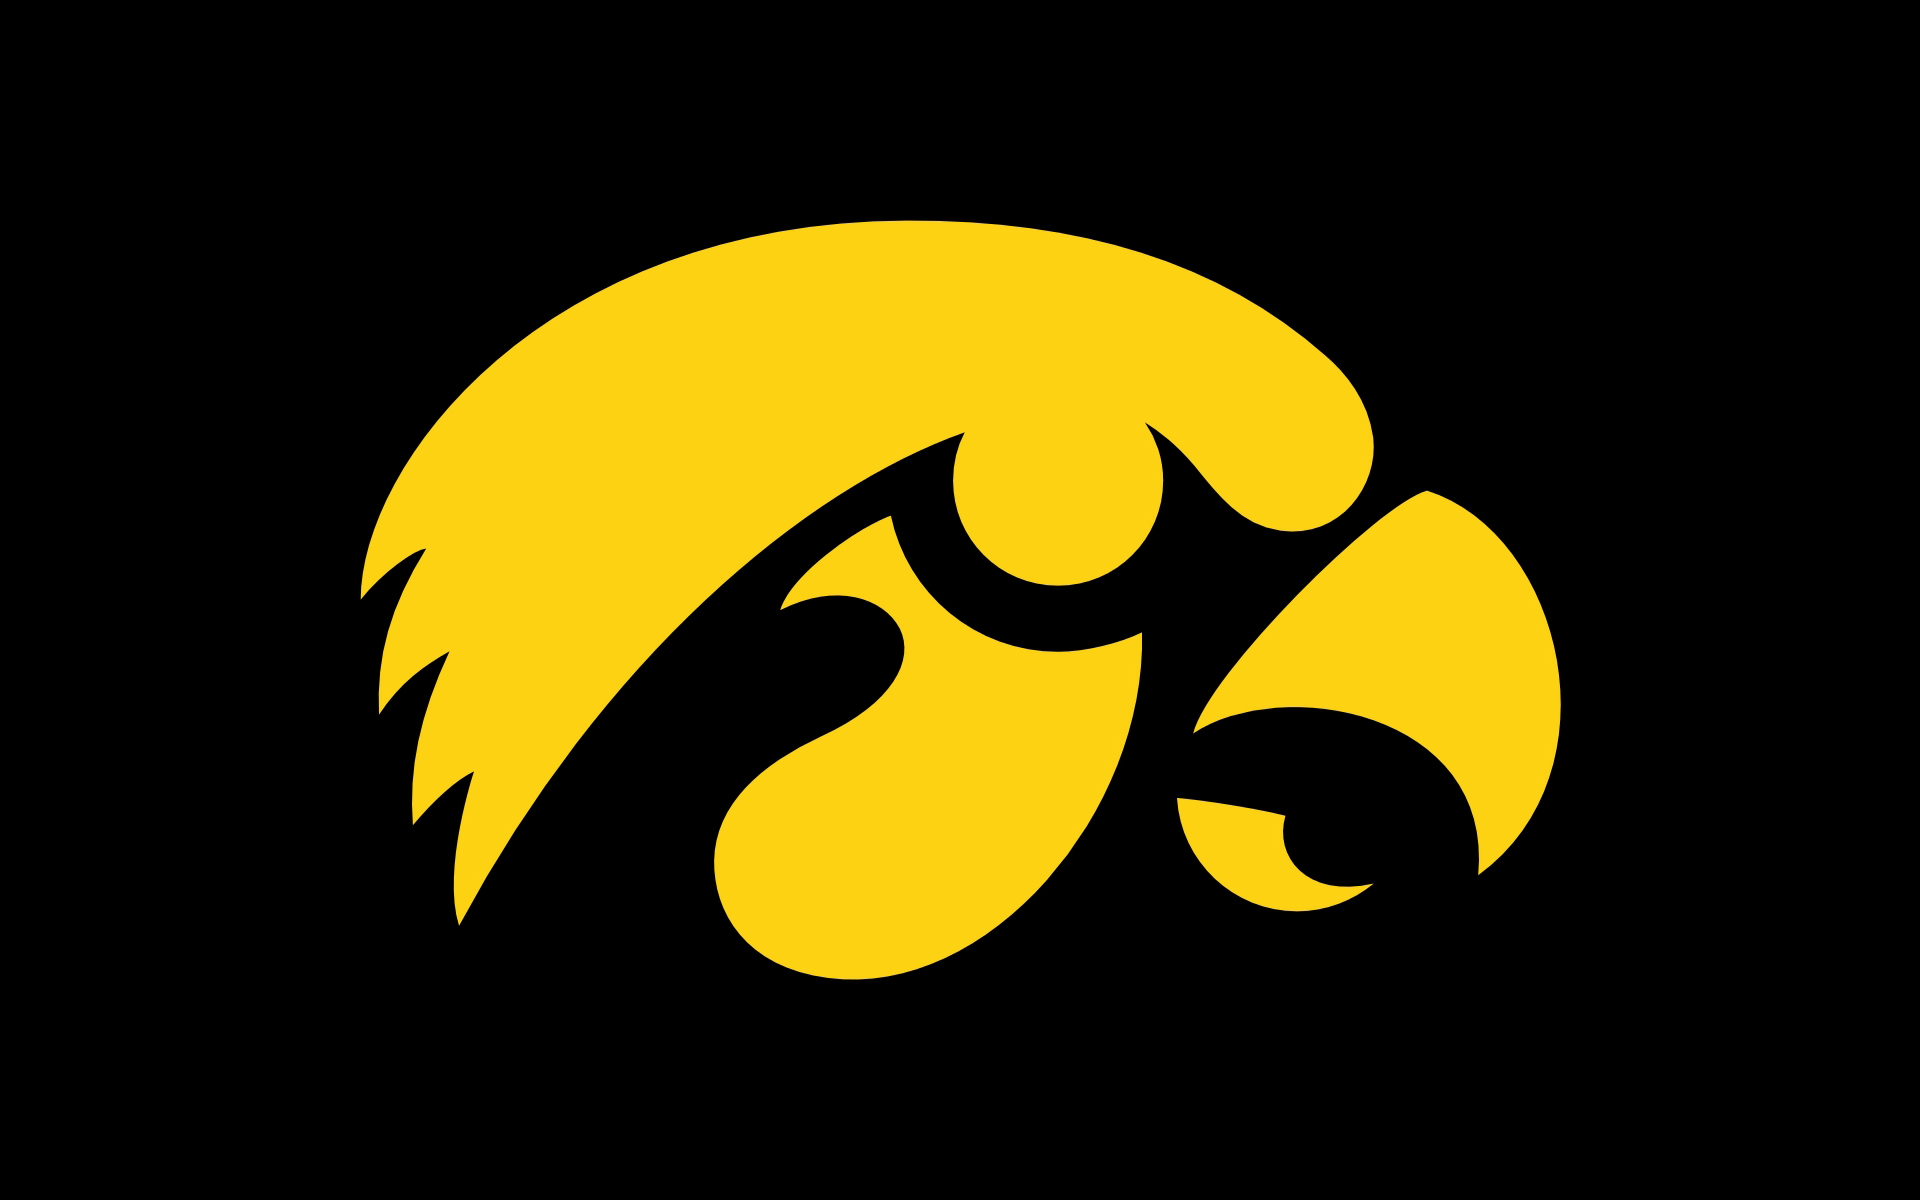 Iowa Hawkeyes 1920 x 1200 Wall Paper Share this post